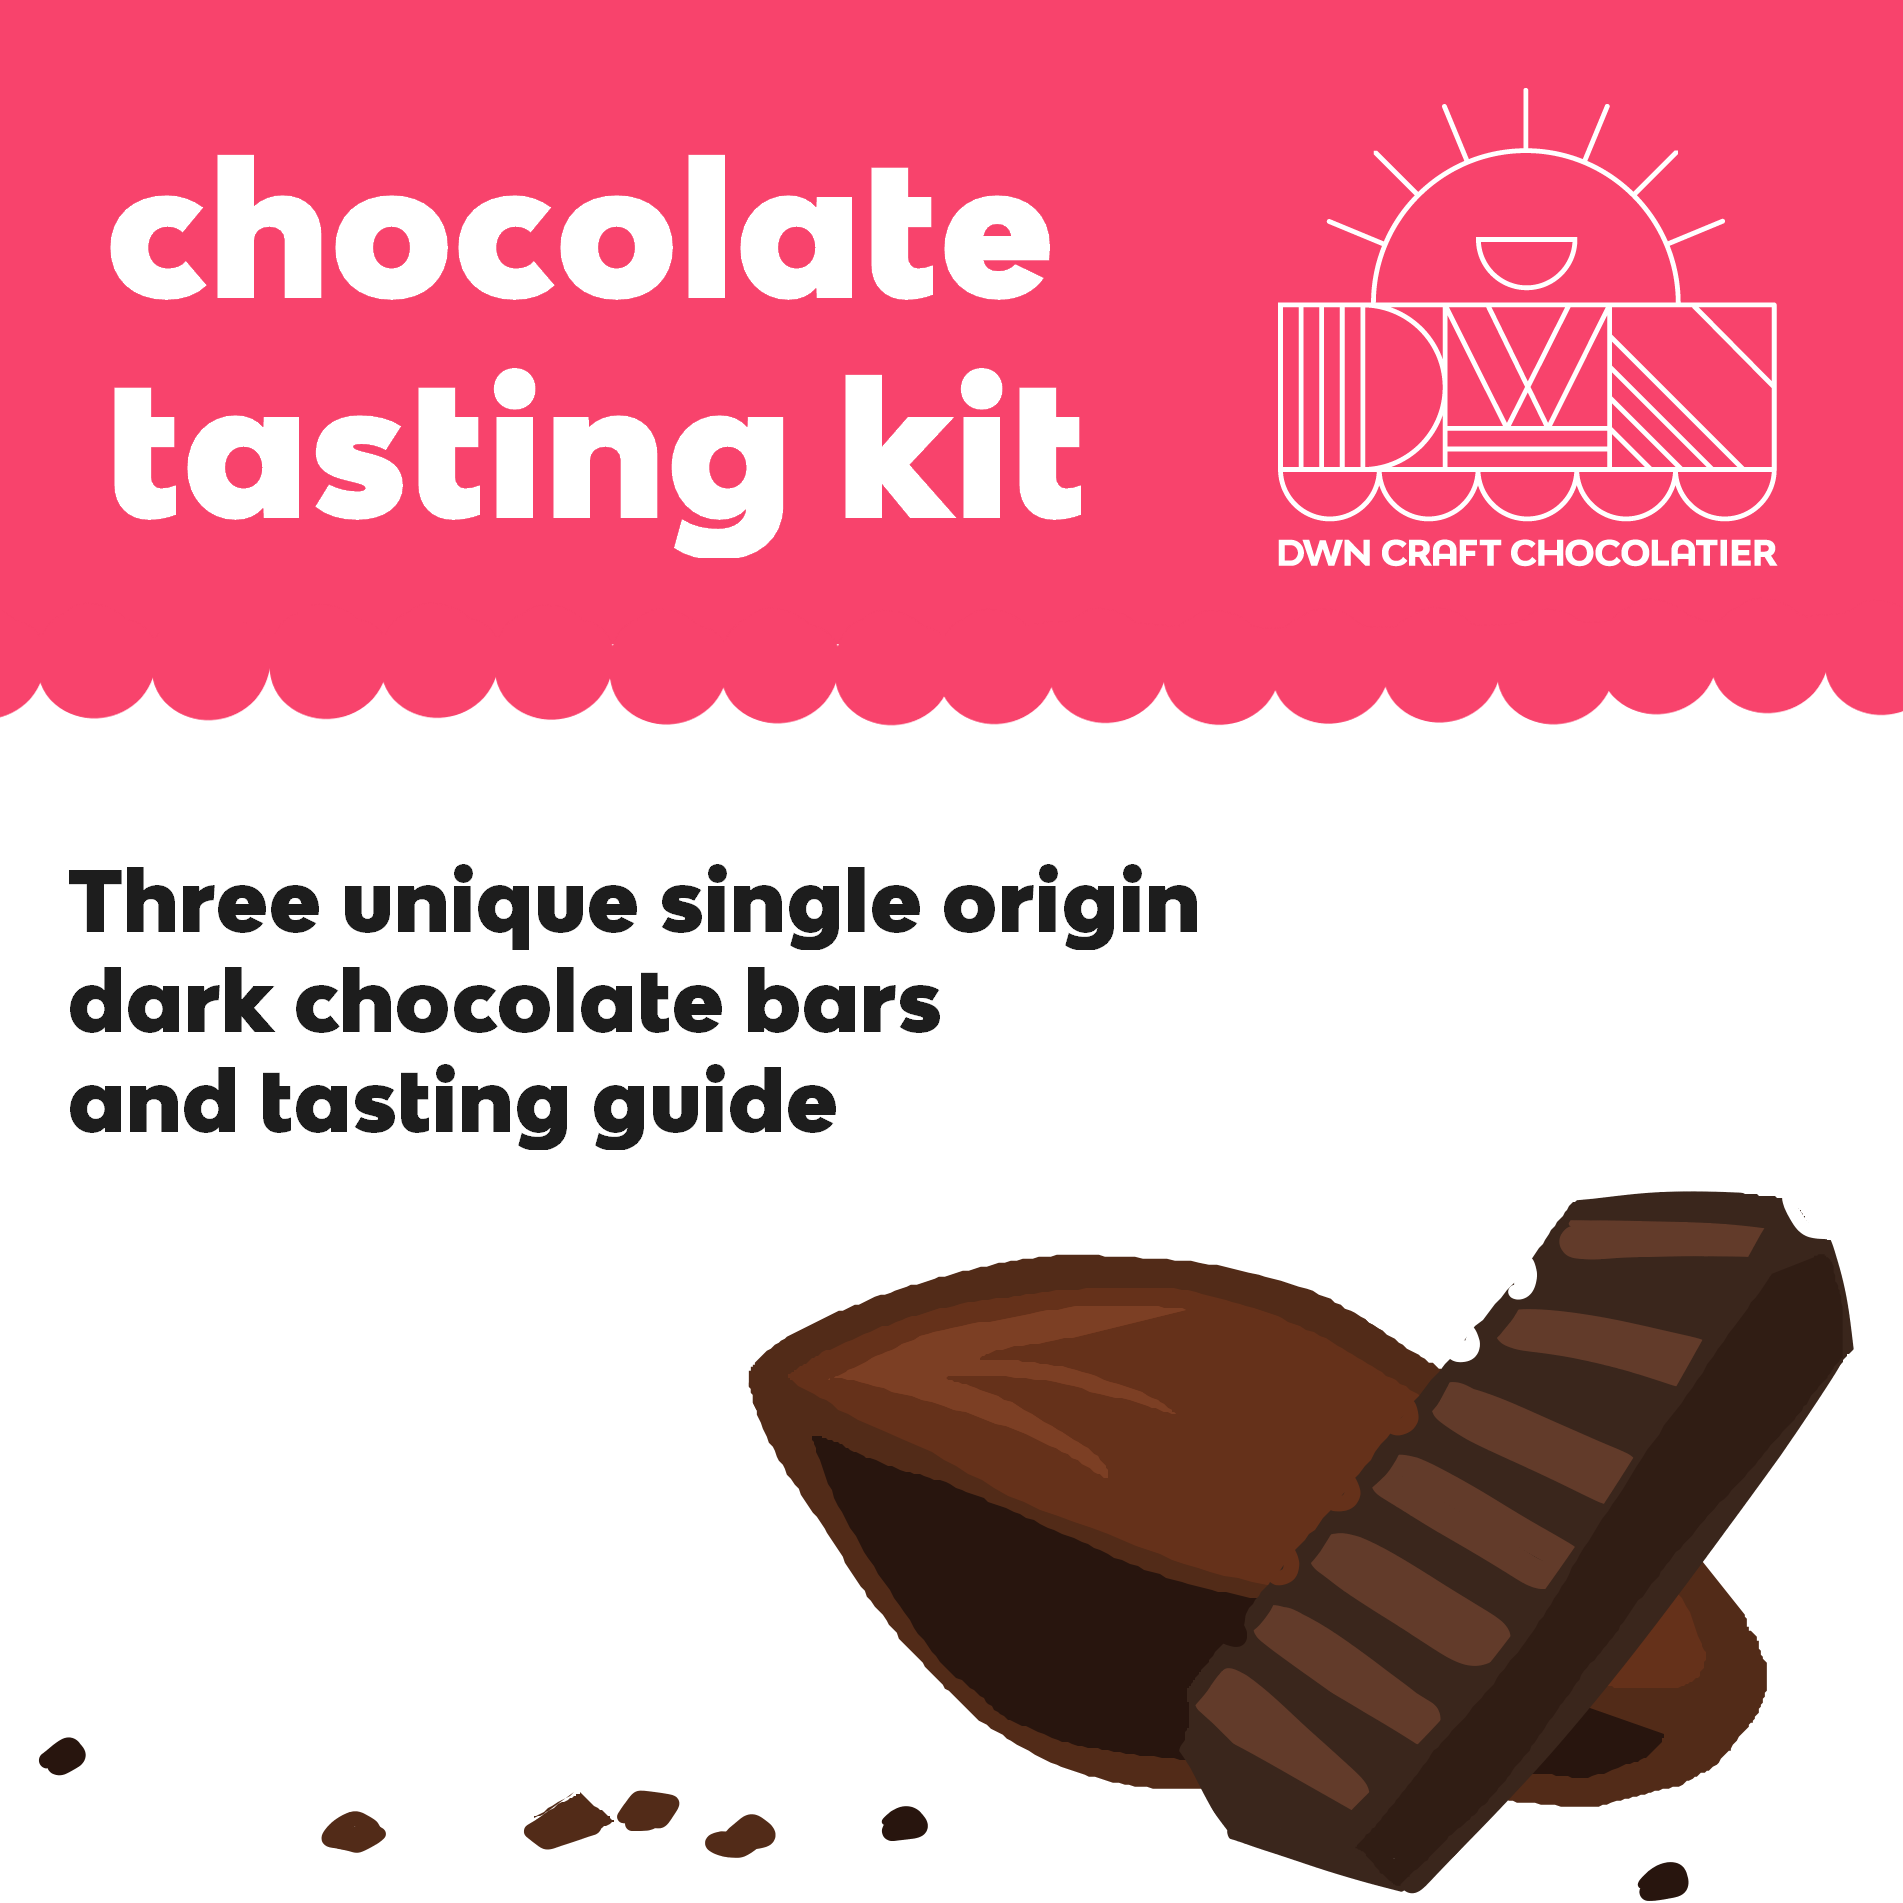 the front page of the chocolate tasting guidebook with text that reads, "chocolate tasting kit. three unique single origin dark chocolate bars and tasting guide"